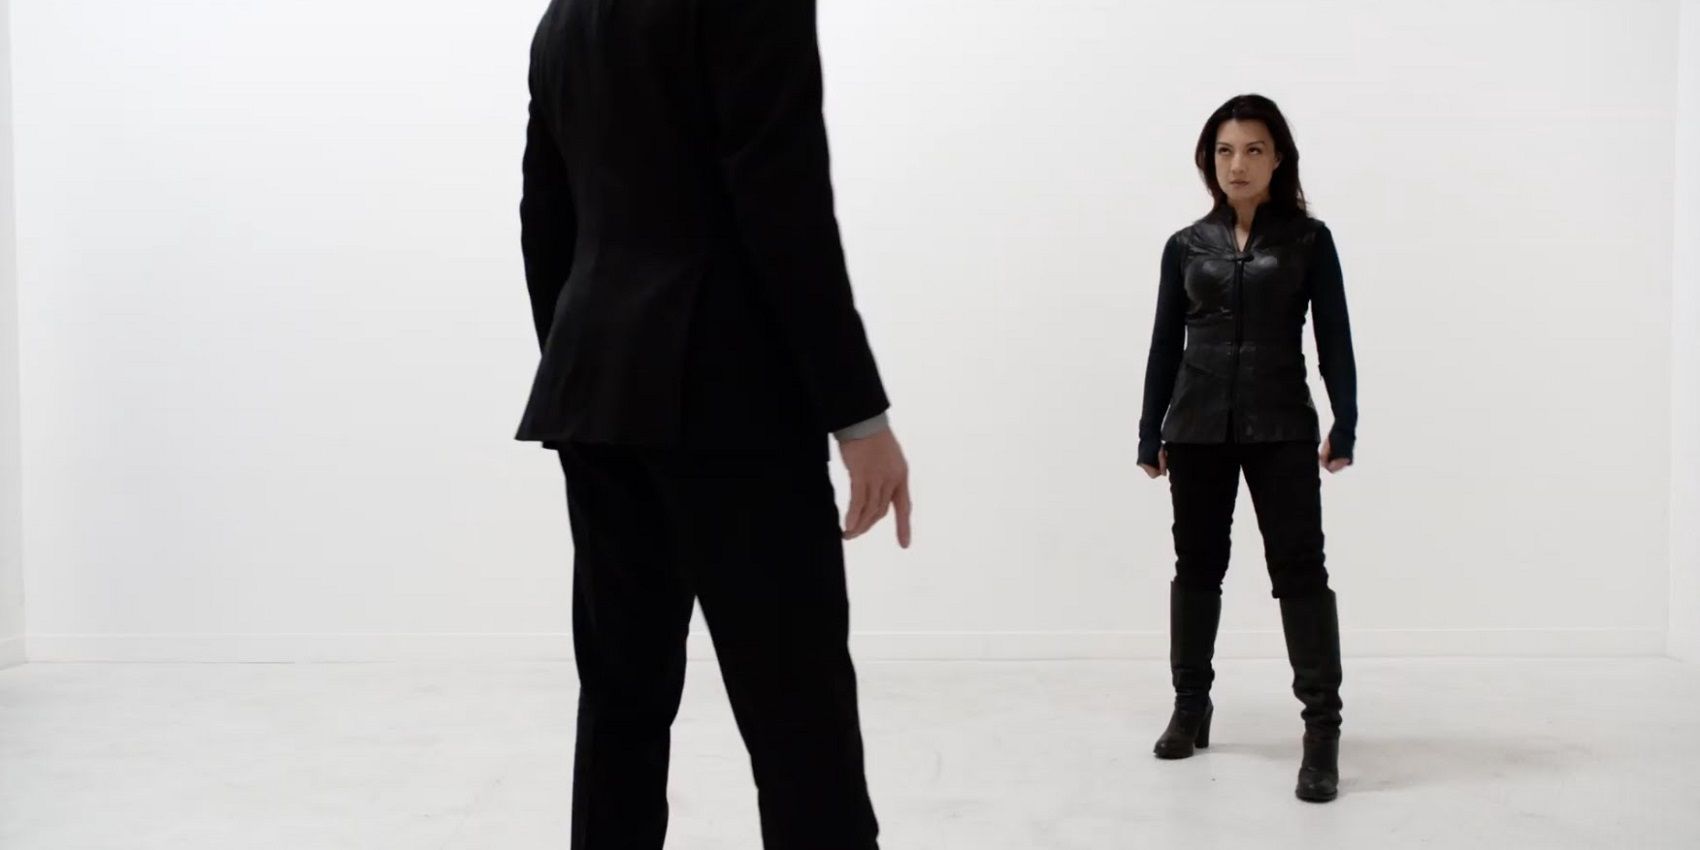 May fights Giyera in Agents of SHIELD